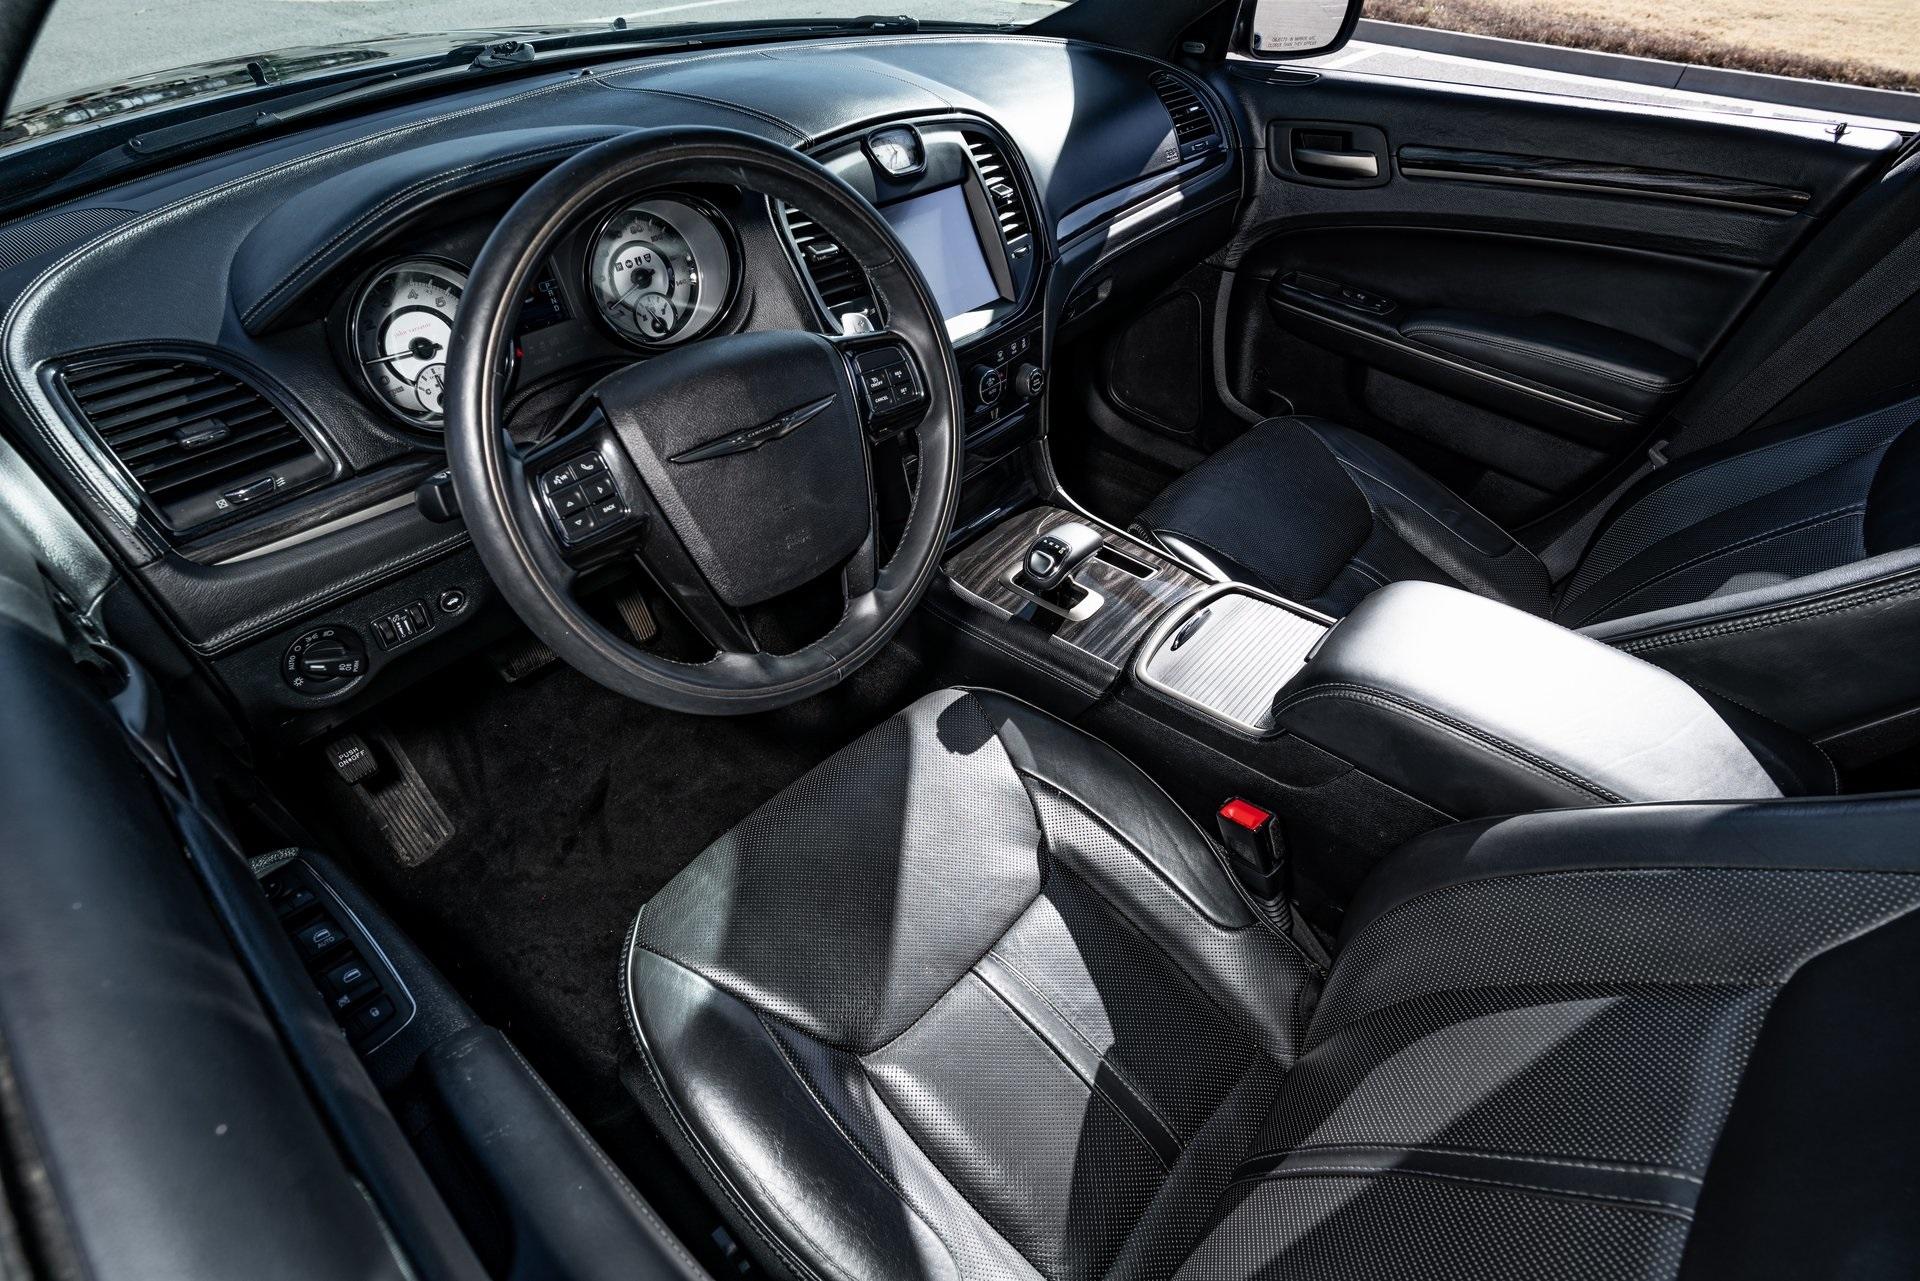 Chrysler 300C Platinum: Bold on the outside, luxurious on the inside - WTOP  News